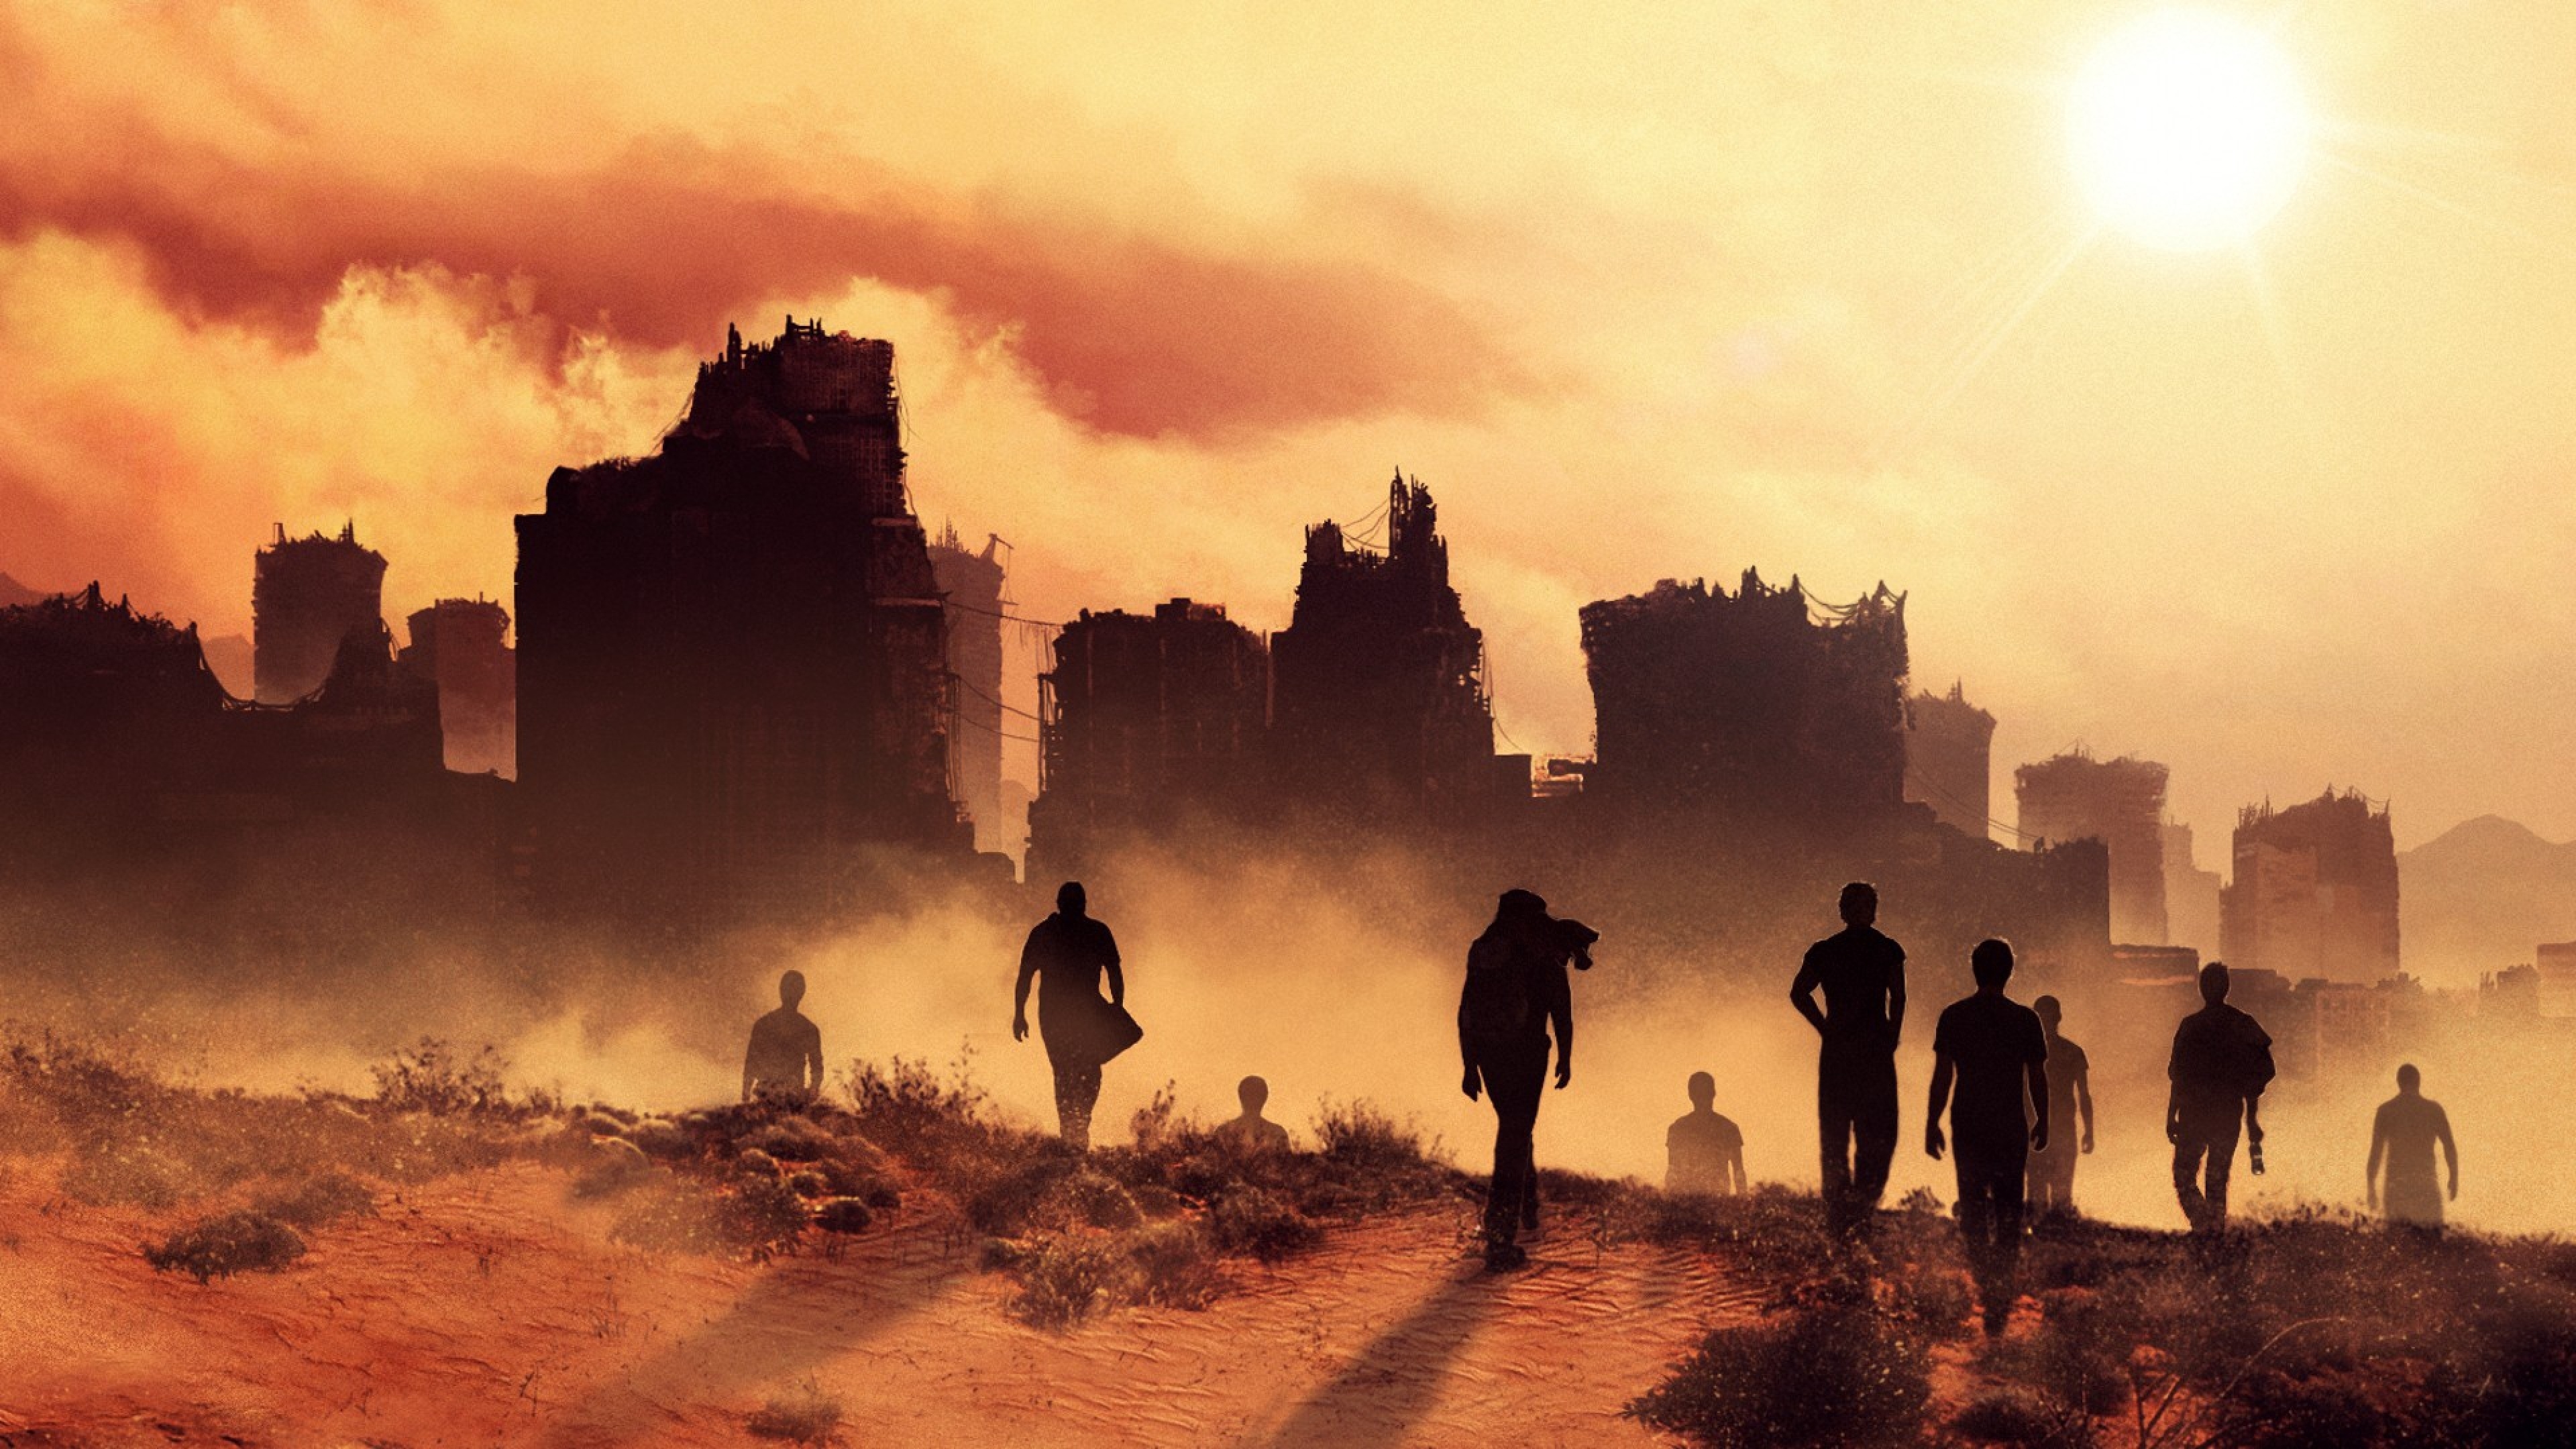 Maze Runner The Scorch Trials Silhouettes for 3840 x 2160 Ultra HD resolution